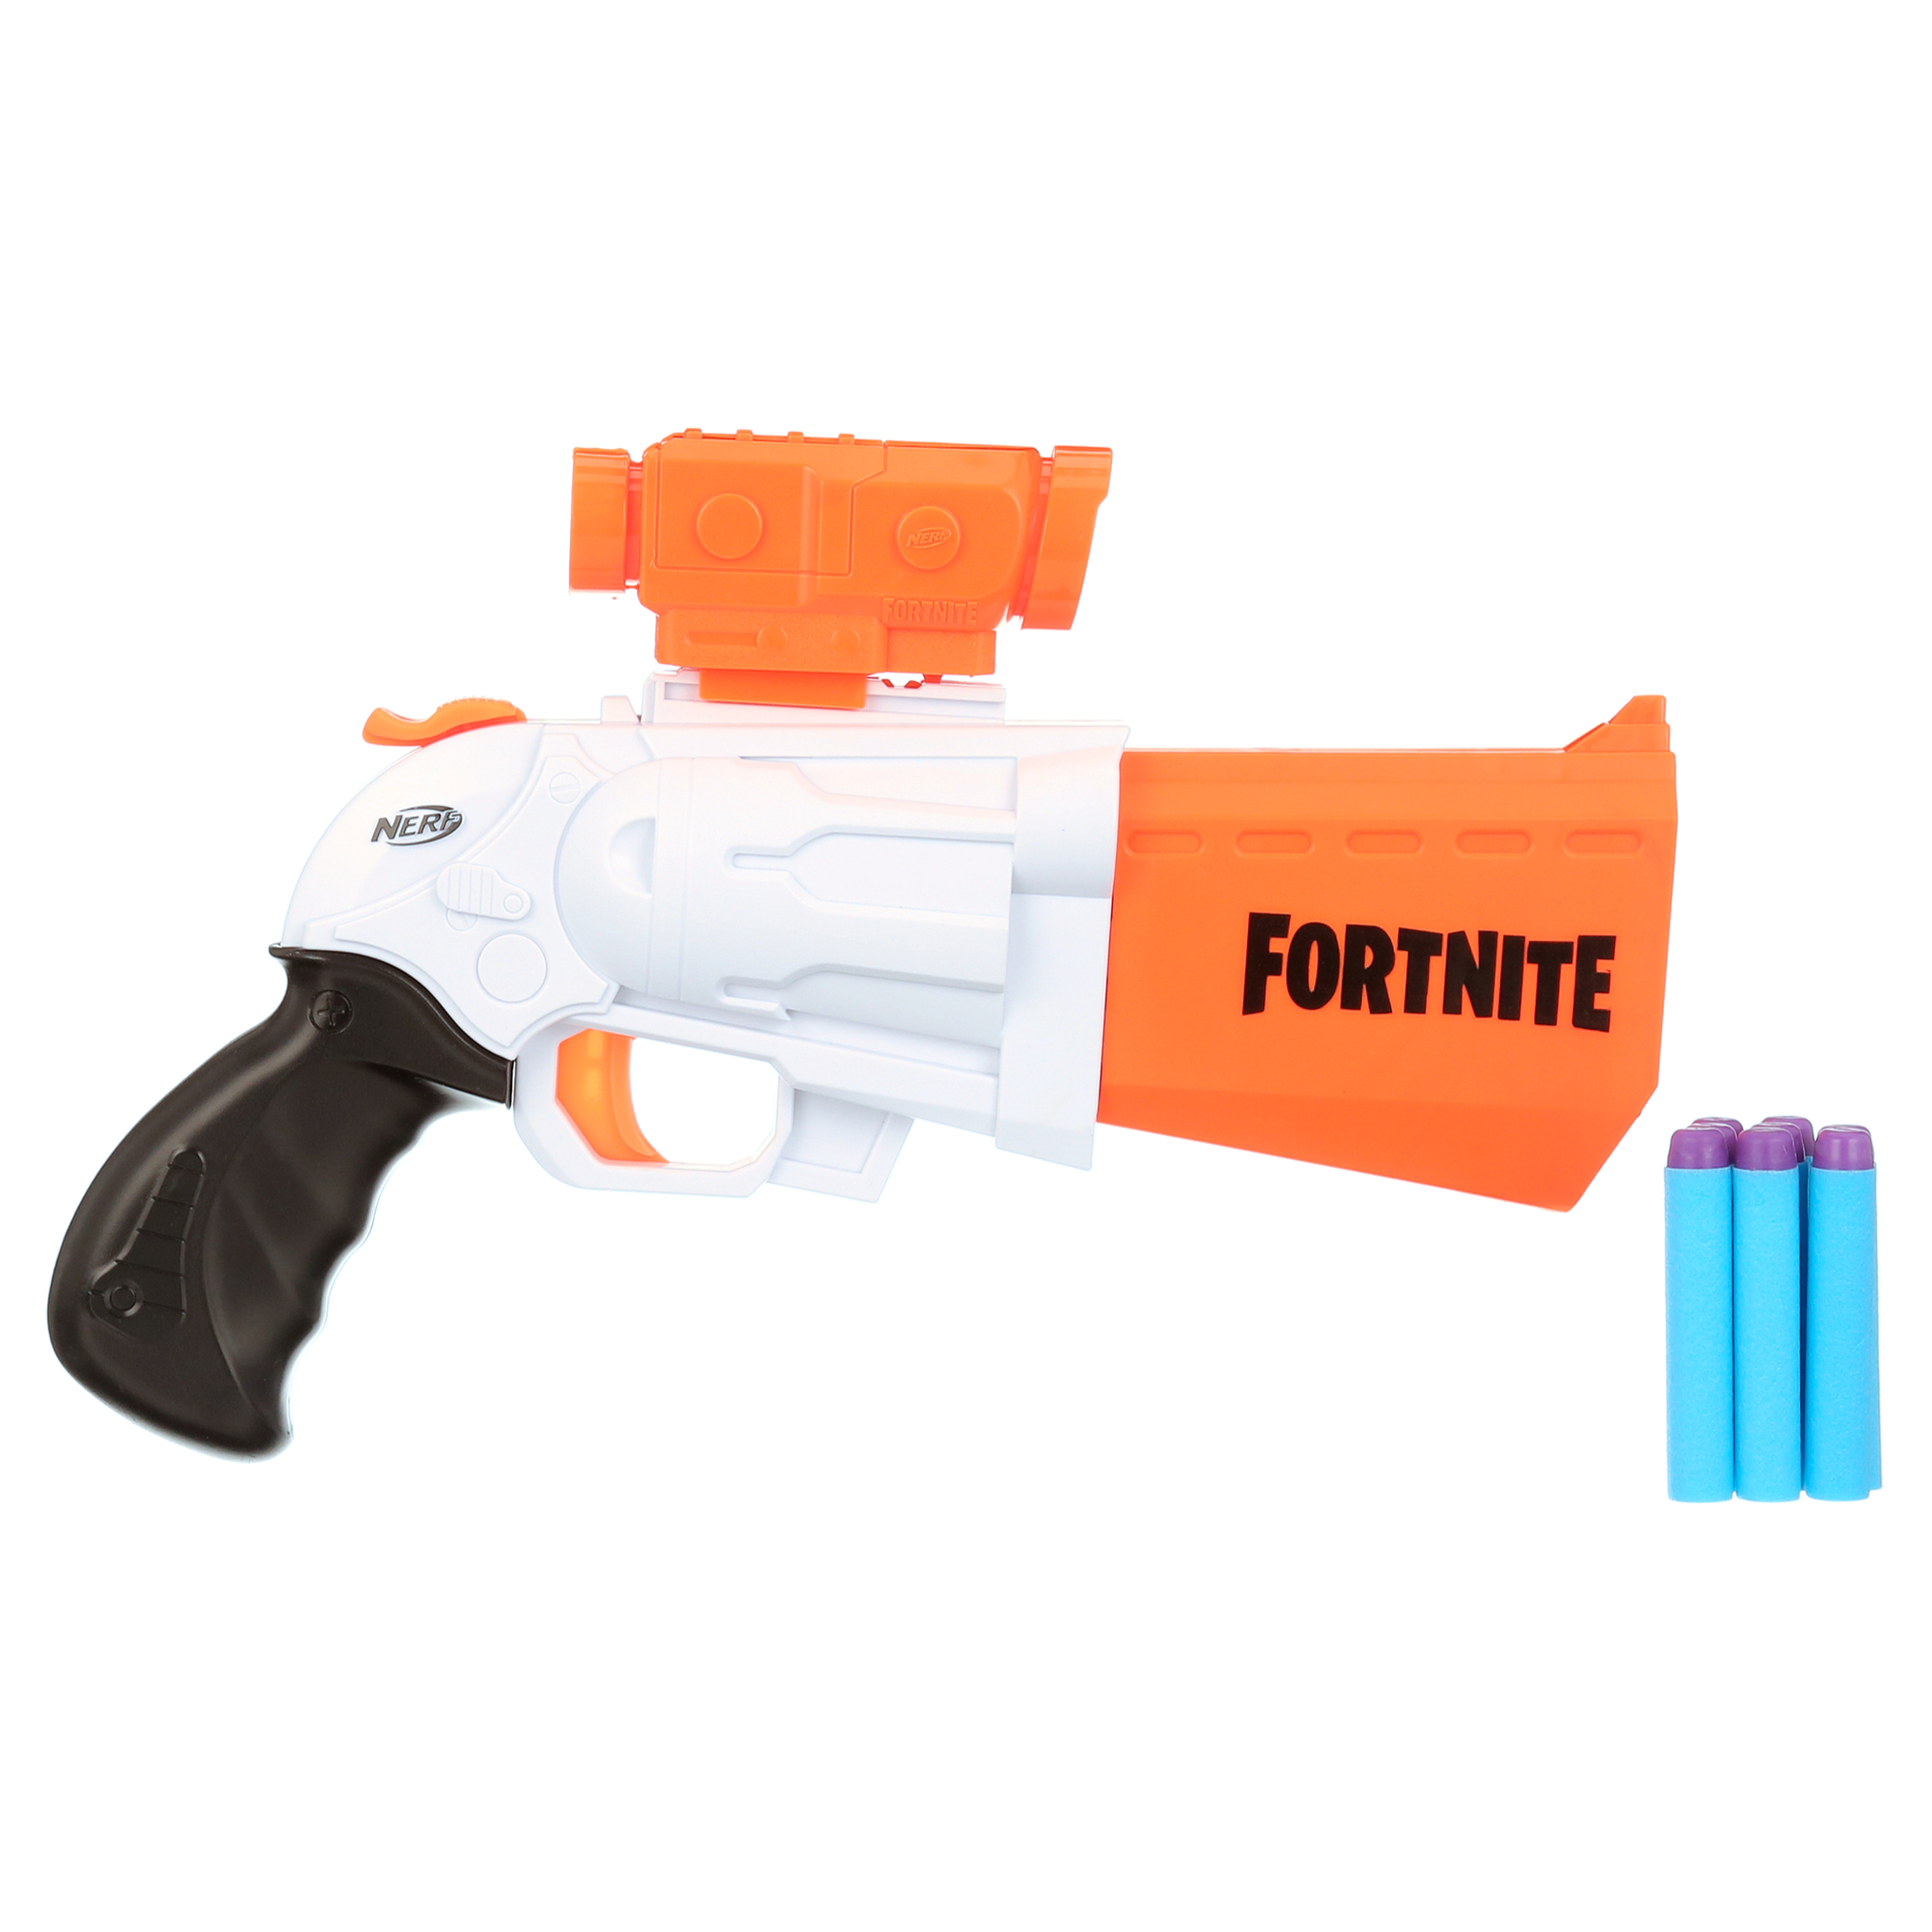 Nerf Fortnite SR Blaster, Includes 8 Official Nerf Darts, for Kids Ages 8 and Up - image 1 of 7